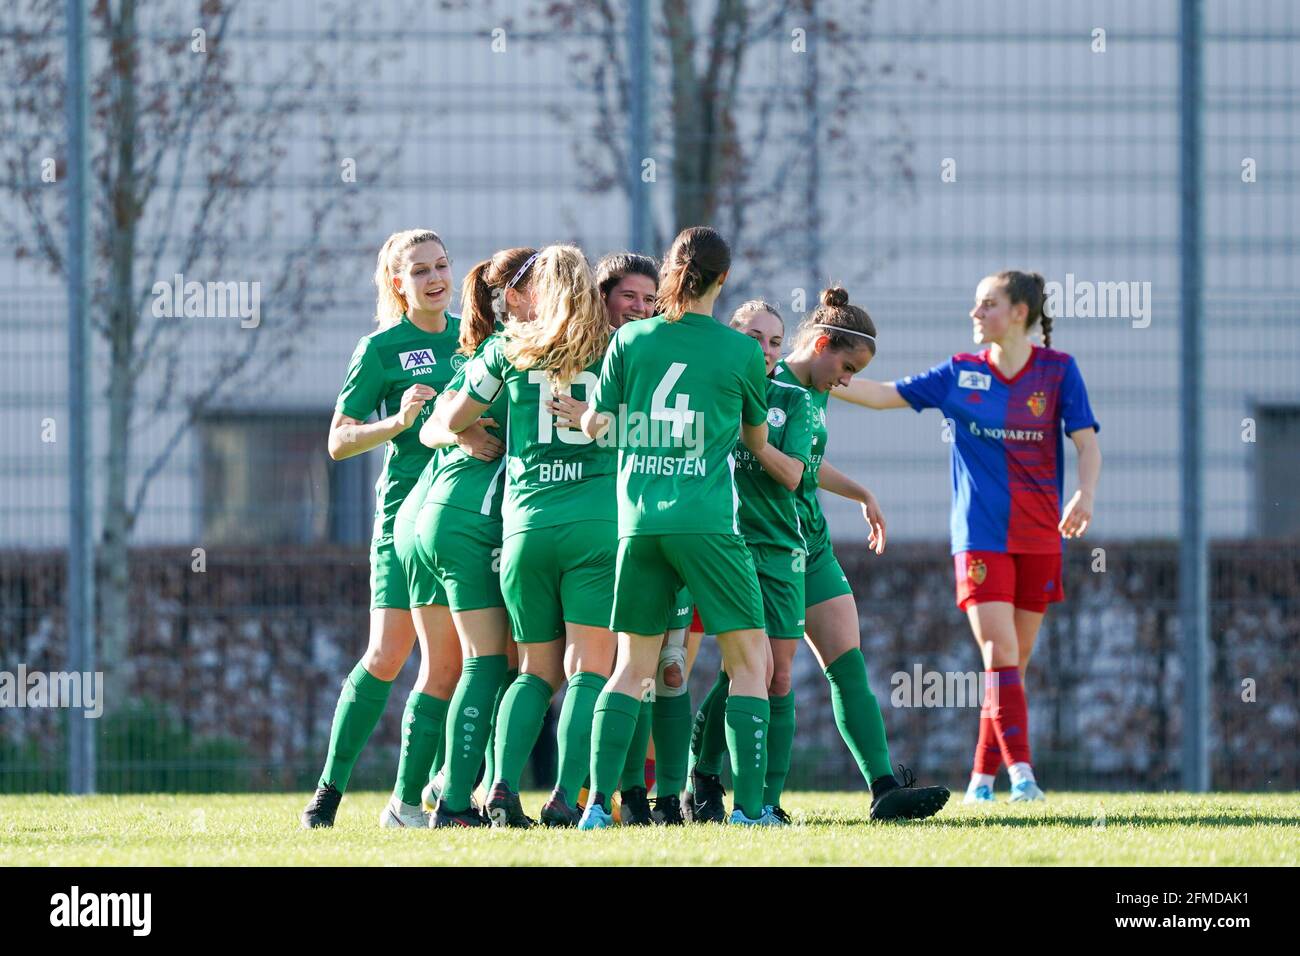 Womens Football Soccer High Resolution Stock Photography And Images Page 55 Alamy